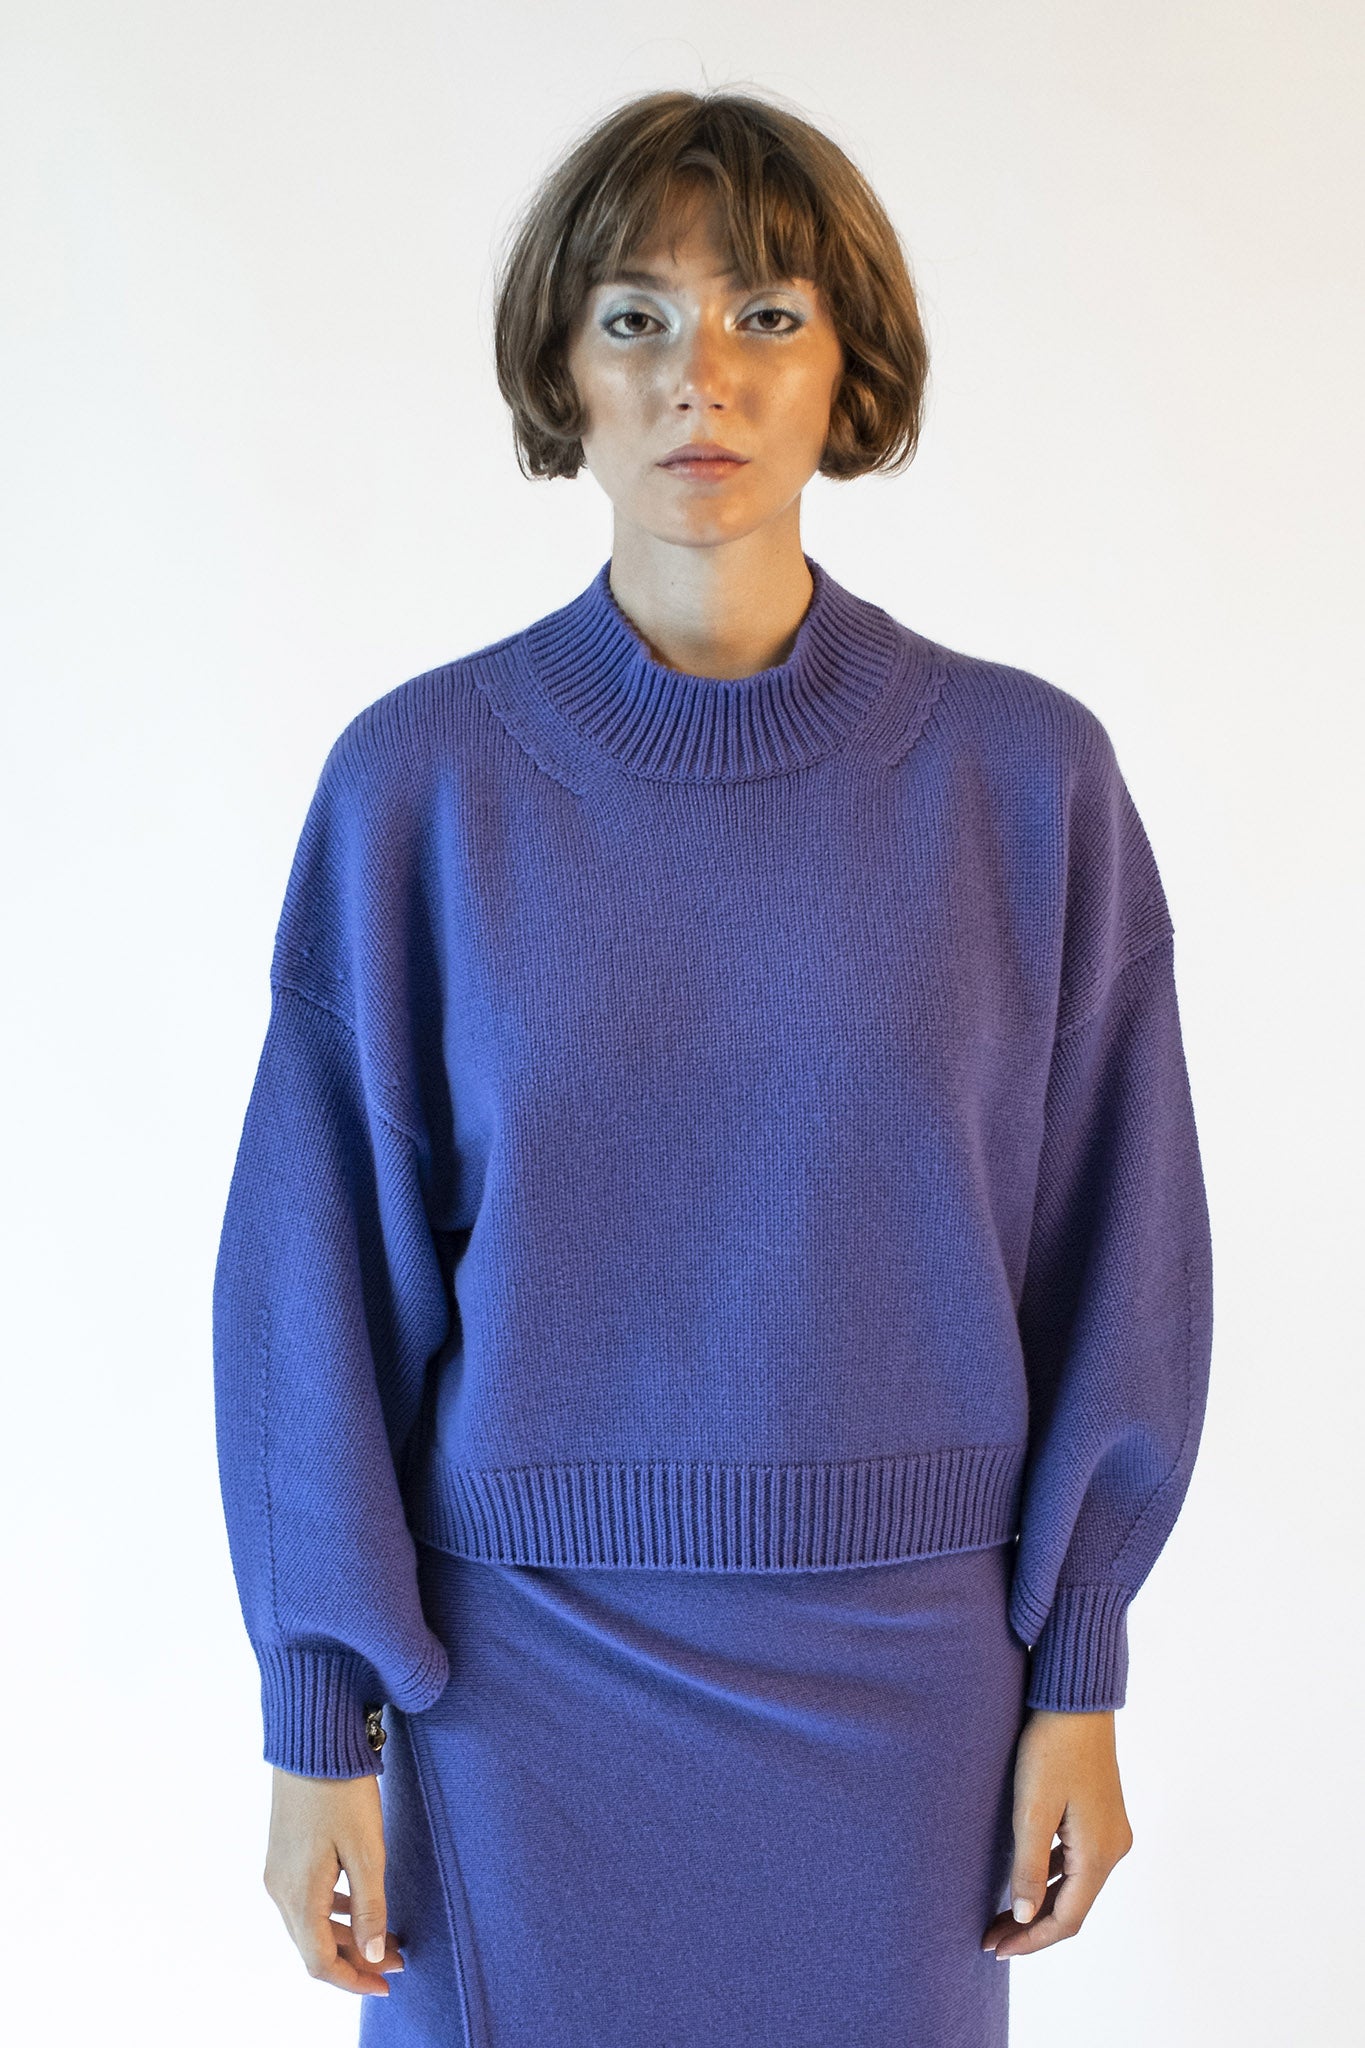 Purple turtleneck sweater with Isabella jewel buttons